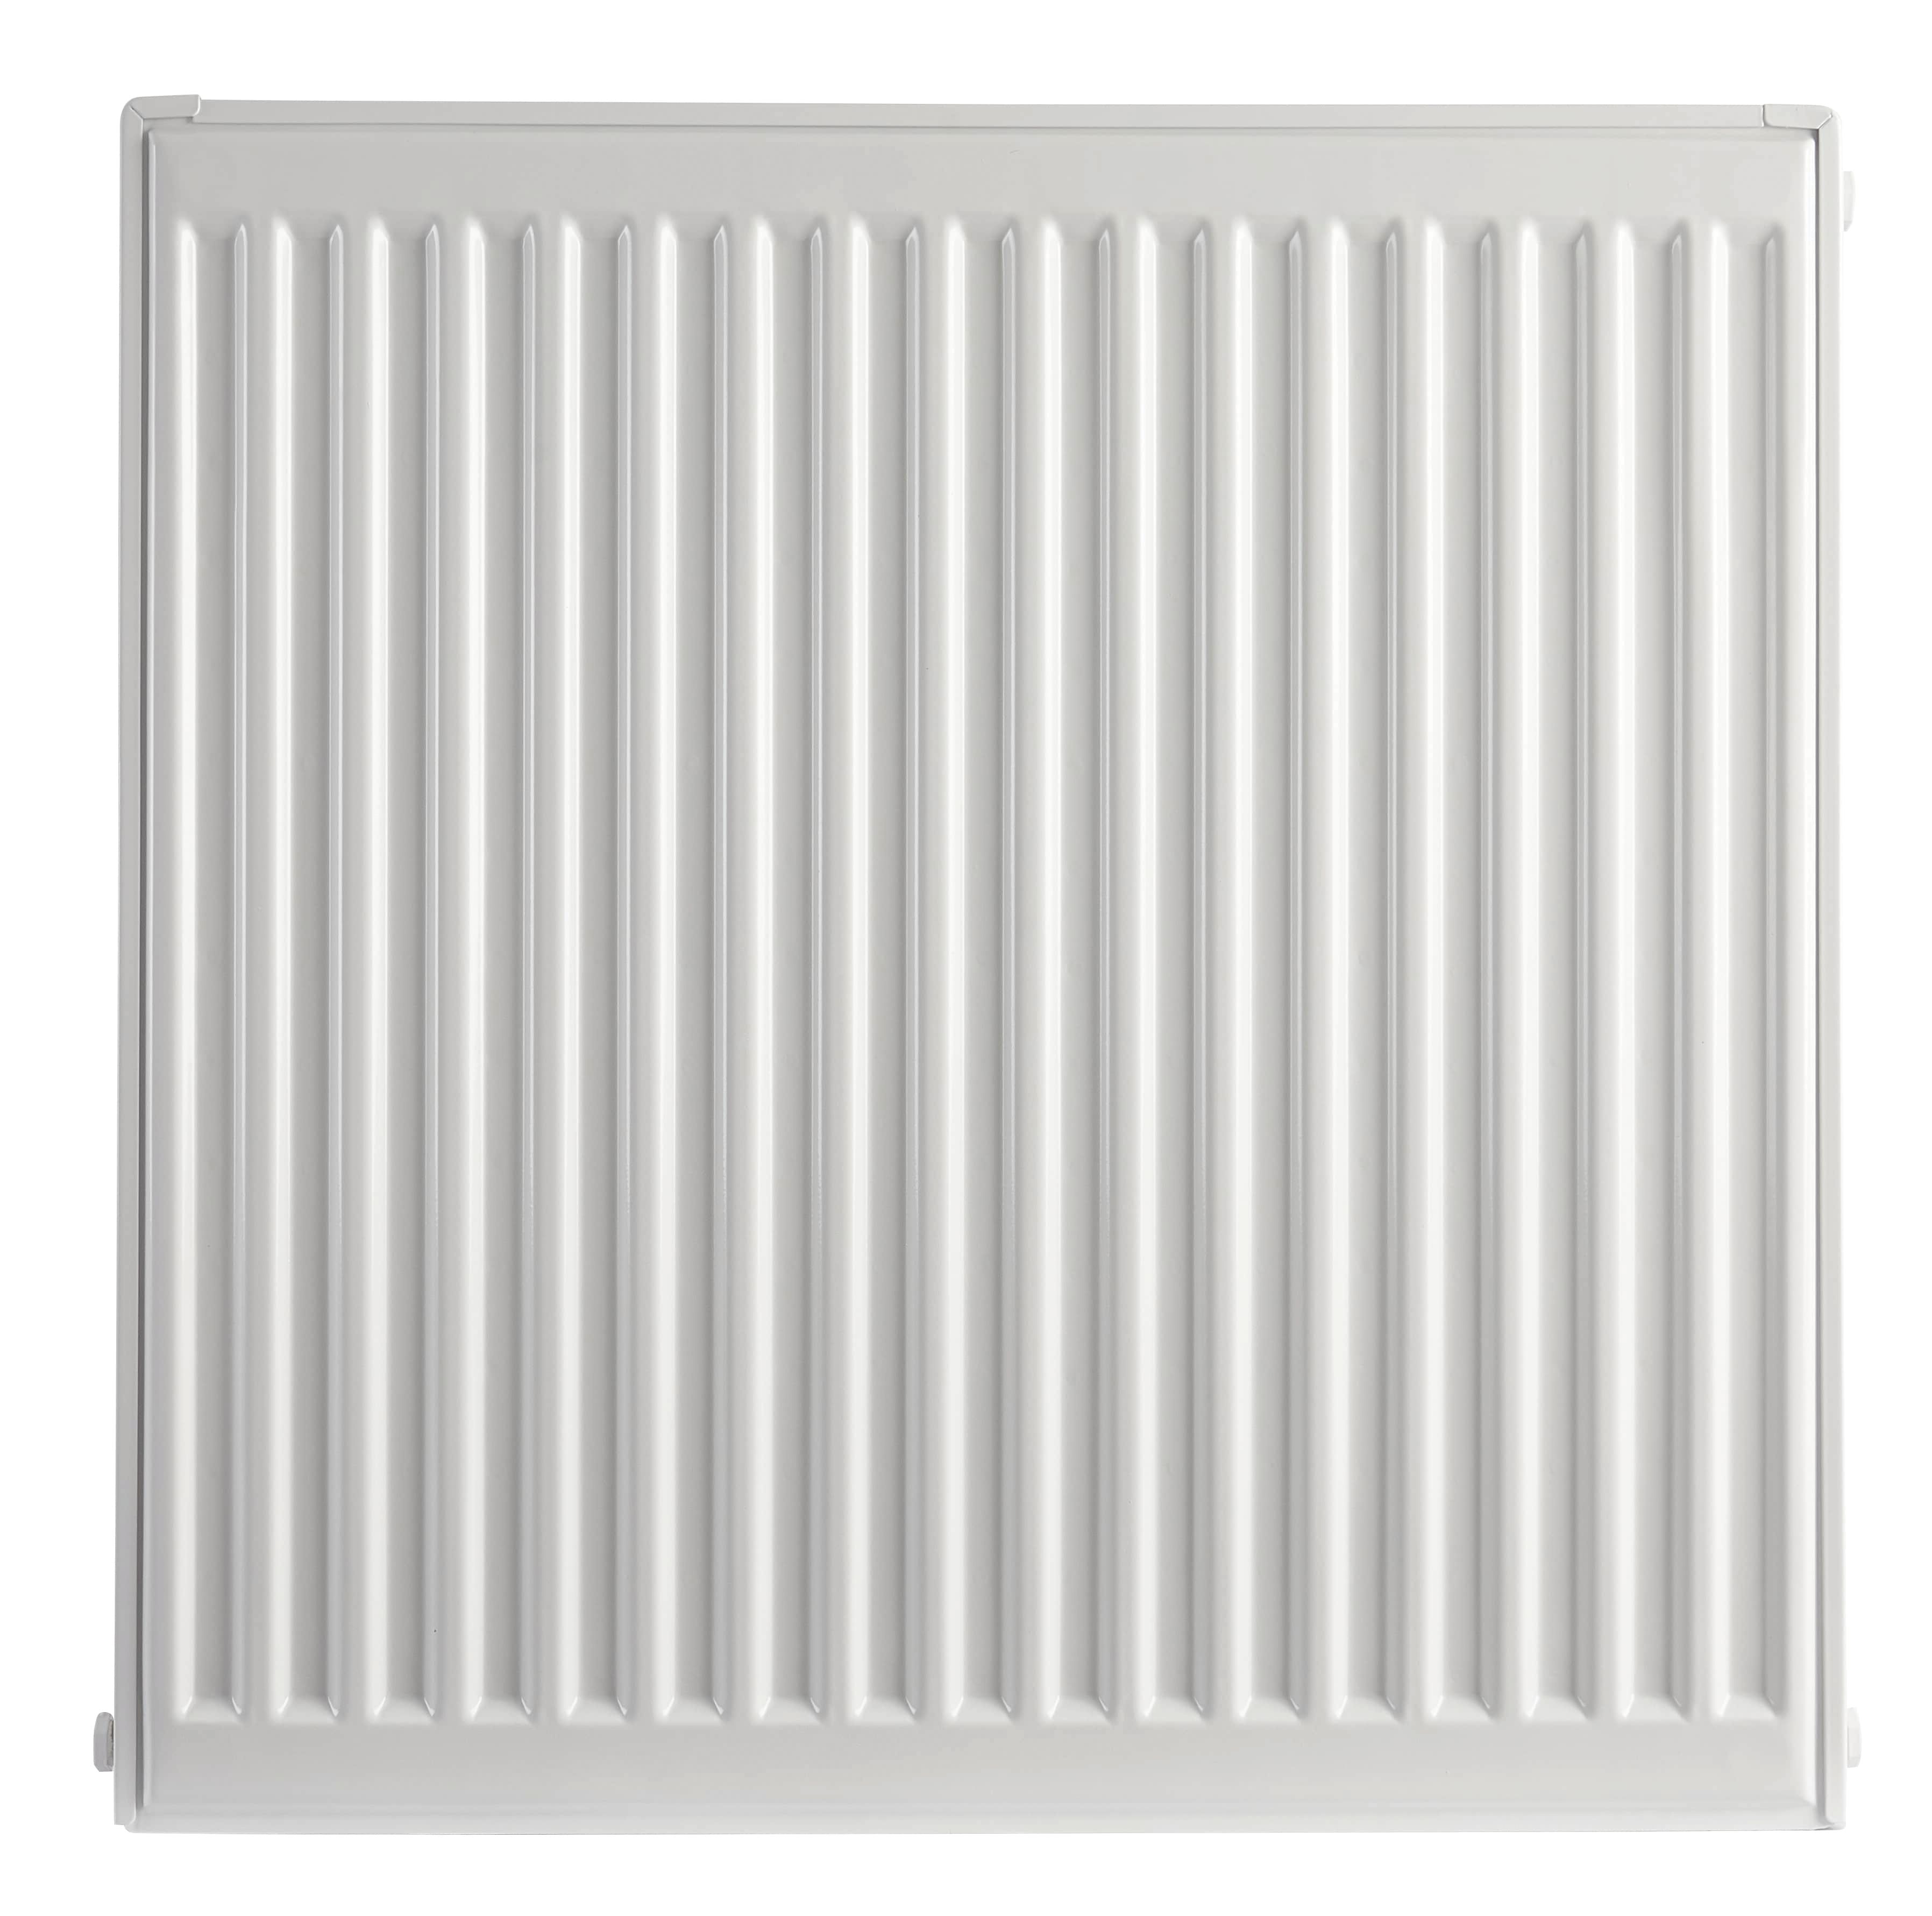 Image of Homeline by Stelrad 600 x 600mm Type 22 Double Panel Premium Double Convector Radiator